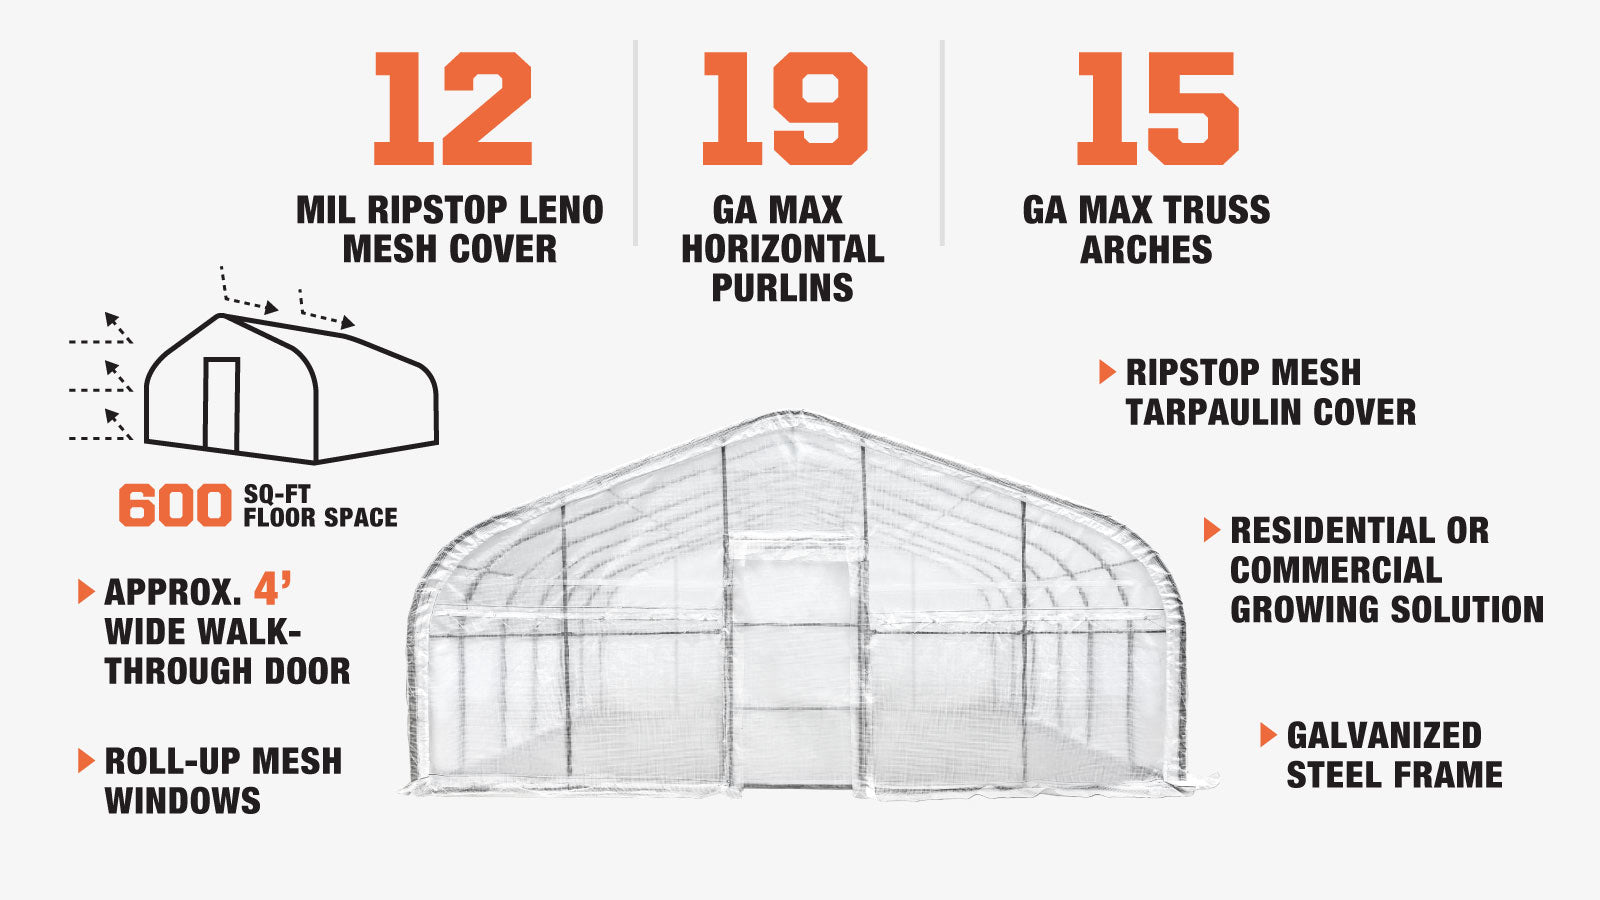 TMG Industrial 20’ x 30’ Tunnel Greenhouse Grow Tent w/12 Mil Ripstop Leno Mesh Cover, Cold Frame, Roll-up Windows, Peak Ceiling Roof, TMG-GH2030-description-image